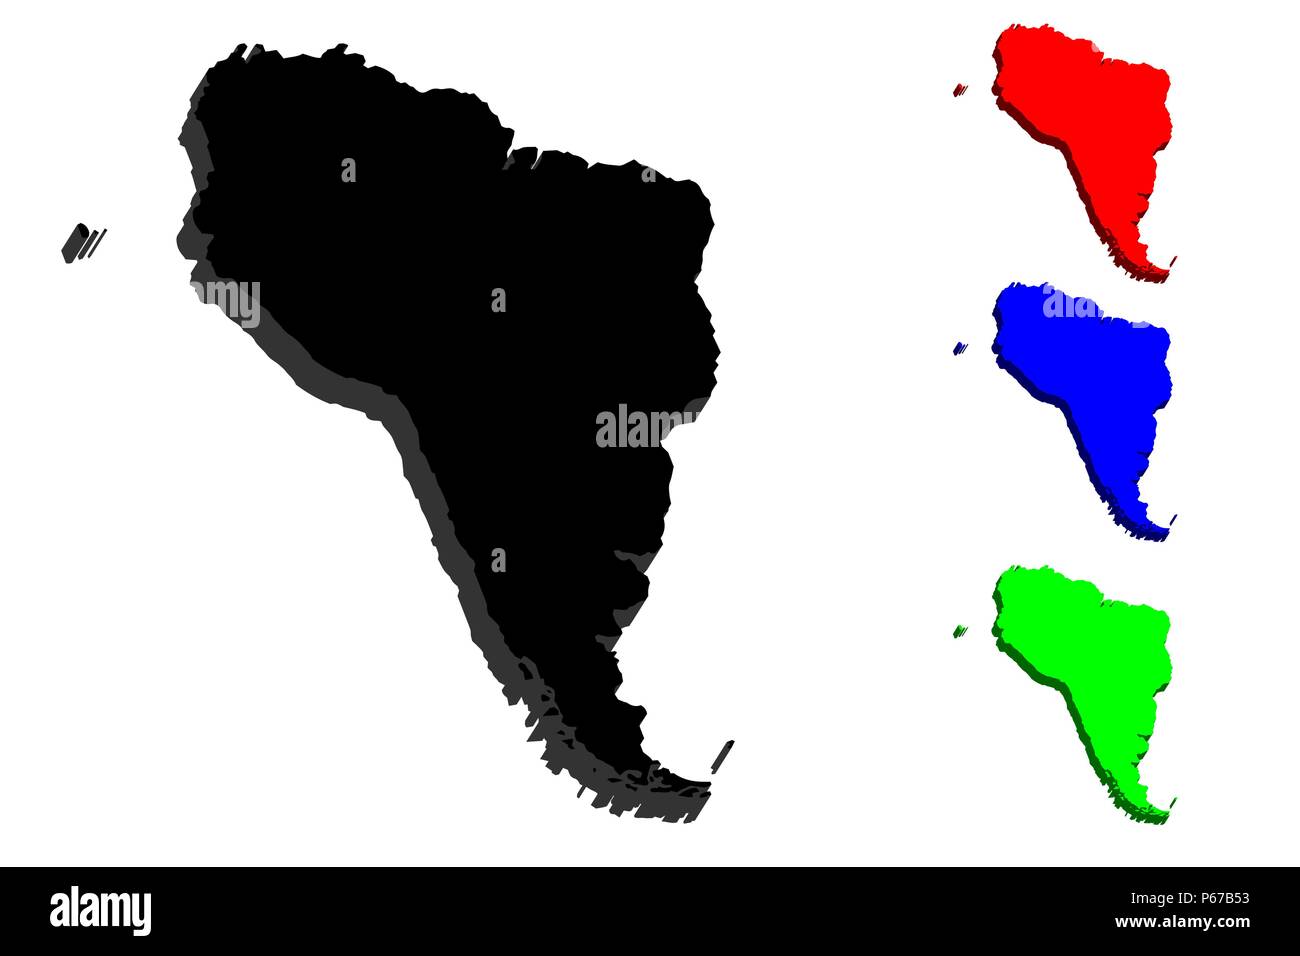 3d Map Of South America Continent Black Red Blue And Green Vector Illustration Stock 1863